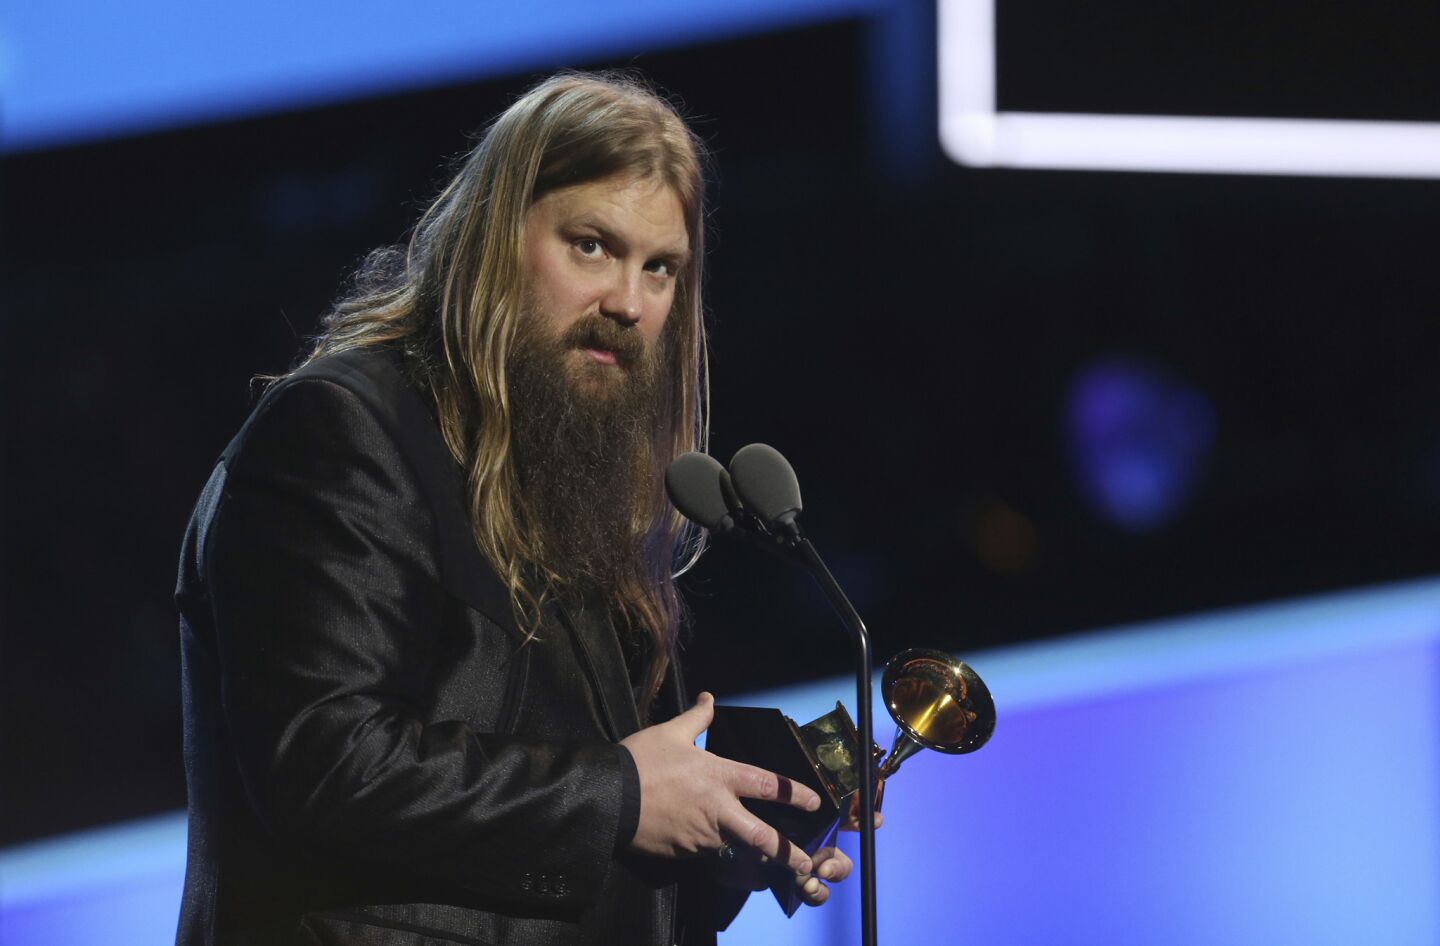 Chris Stapleton accepts the country solo performance award for "Either Way" at the pre-telecast show.